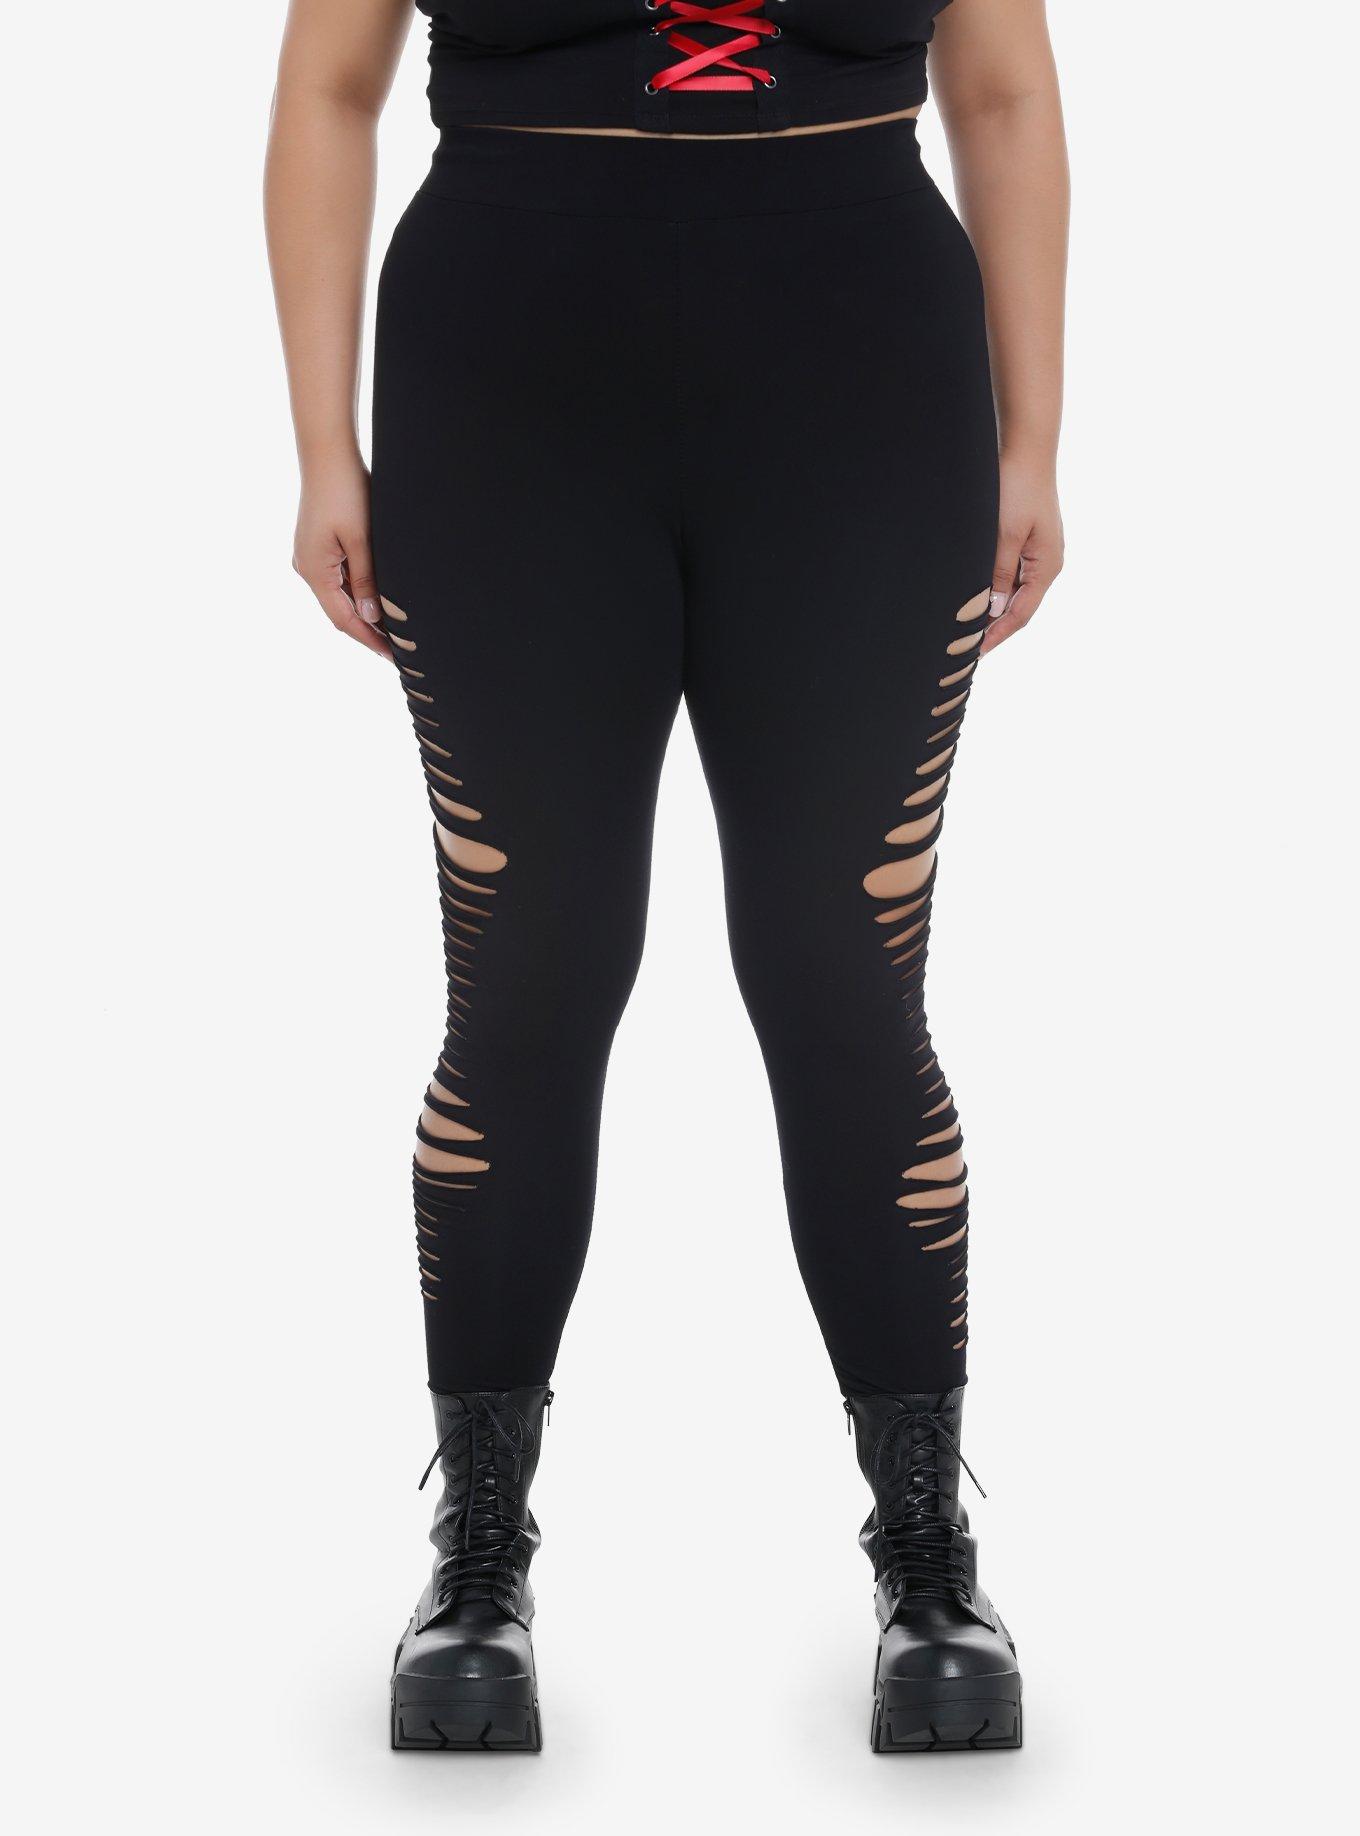 Plus Size Ripped Tights